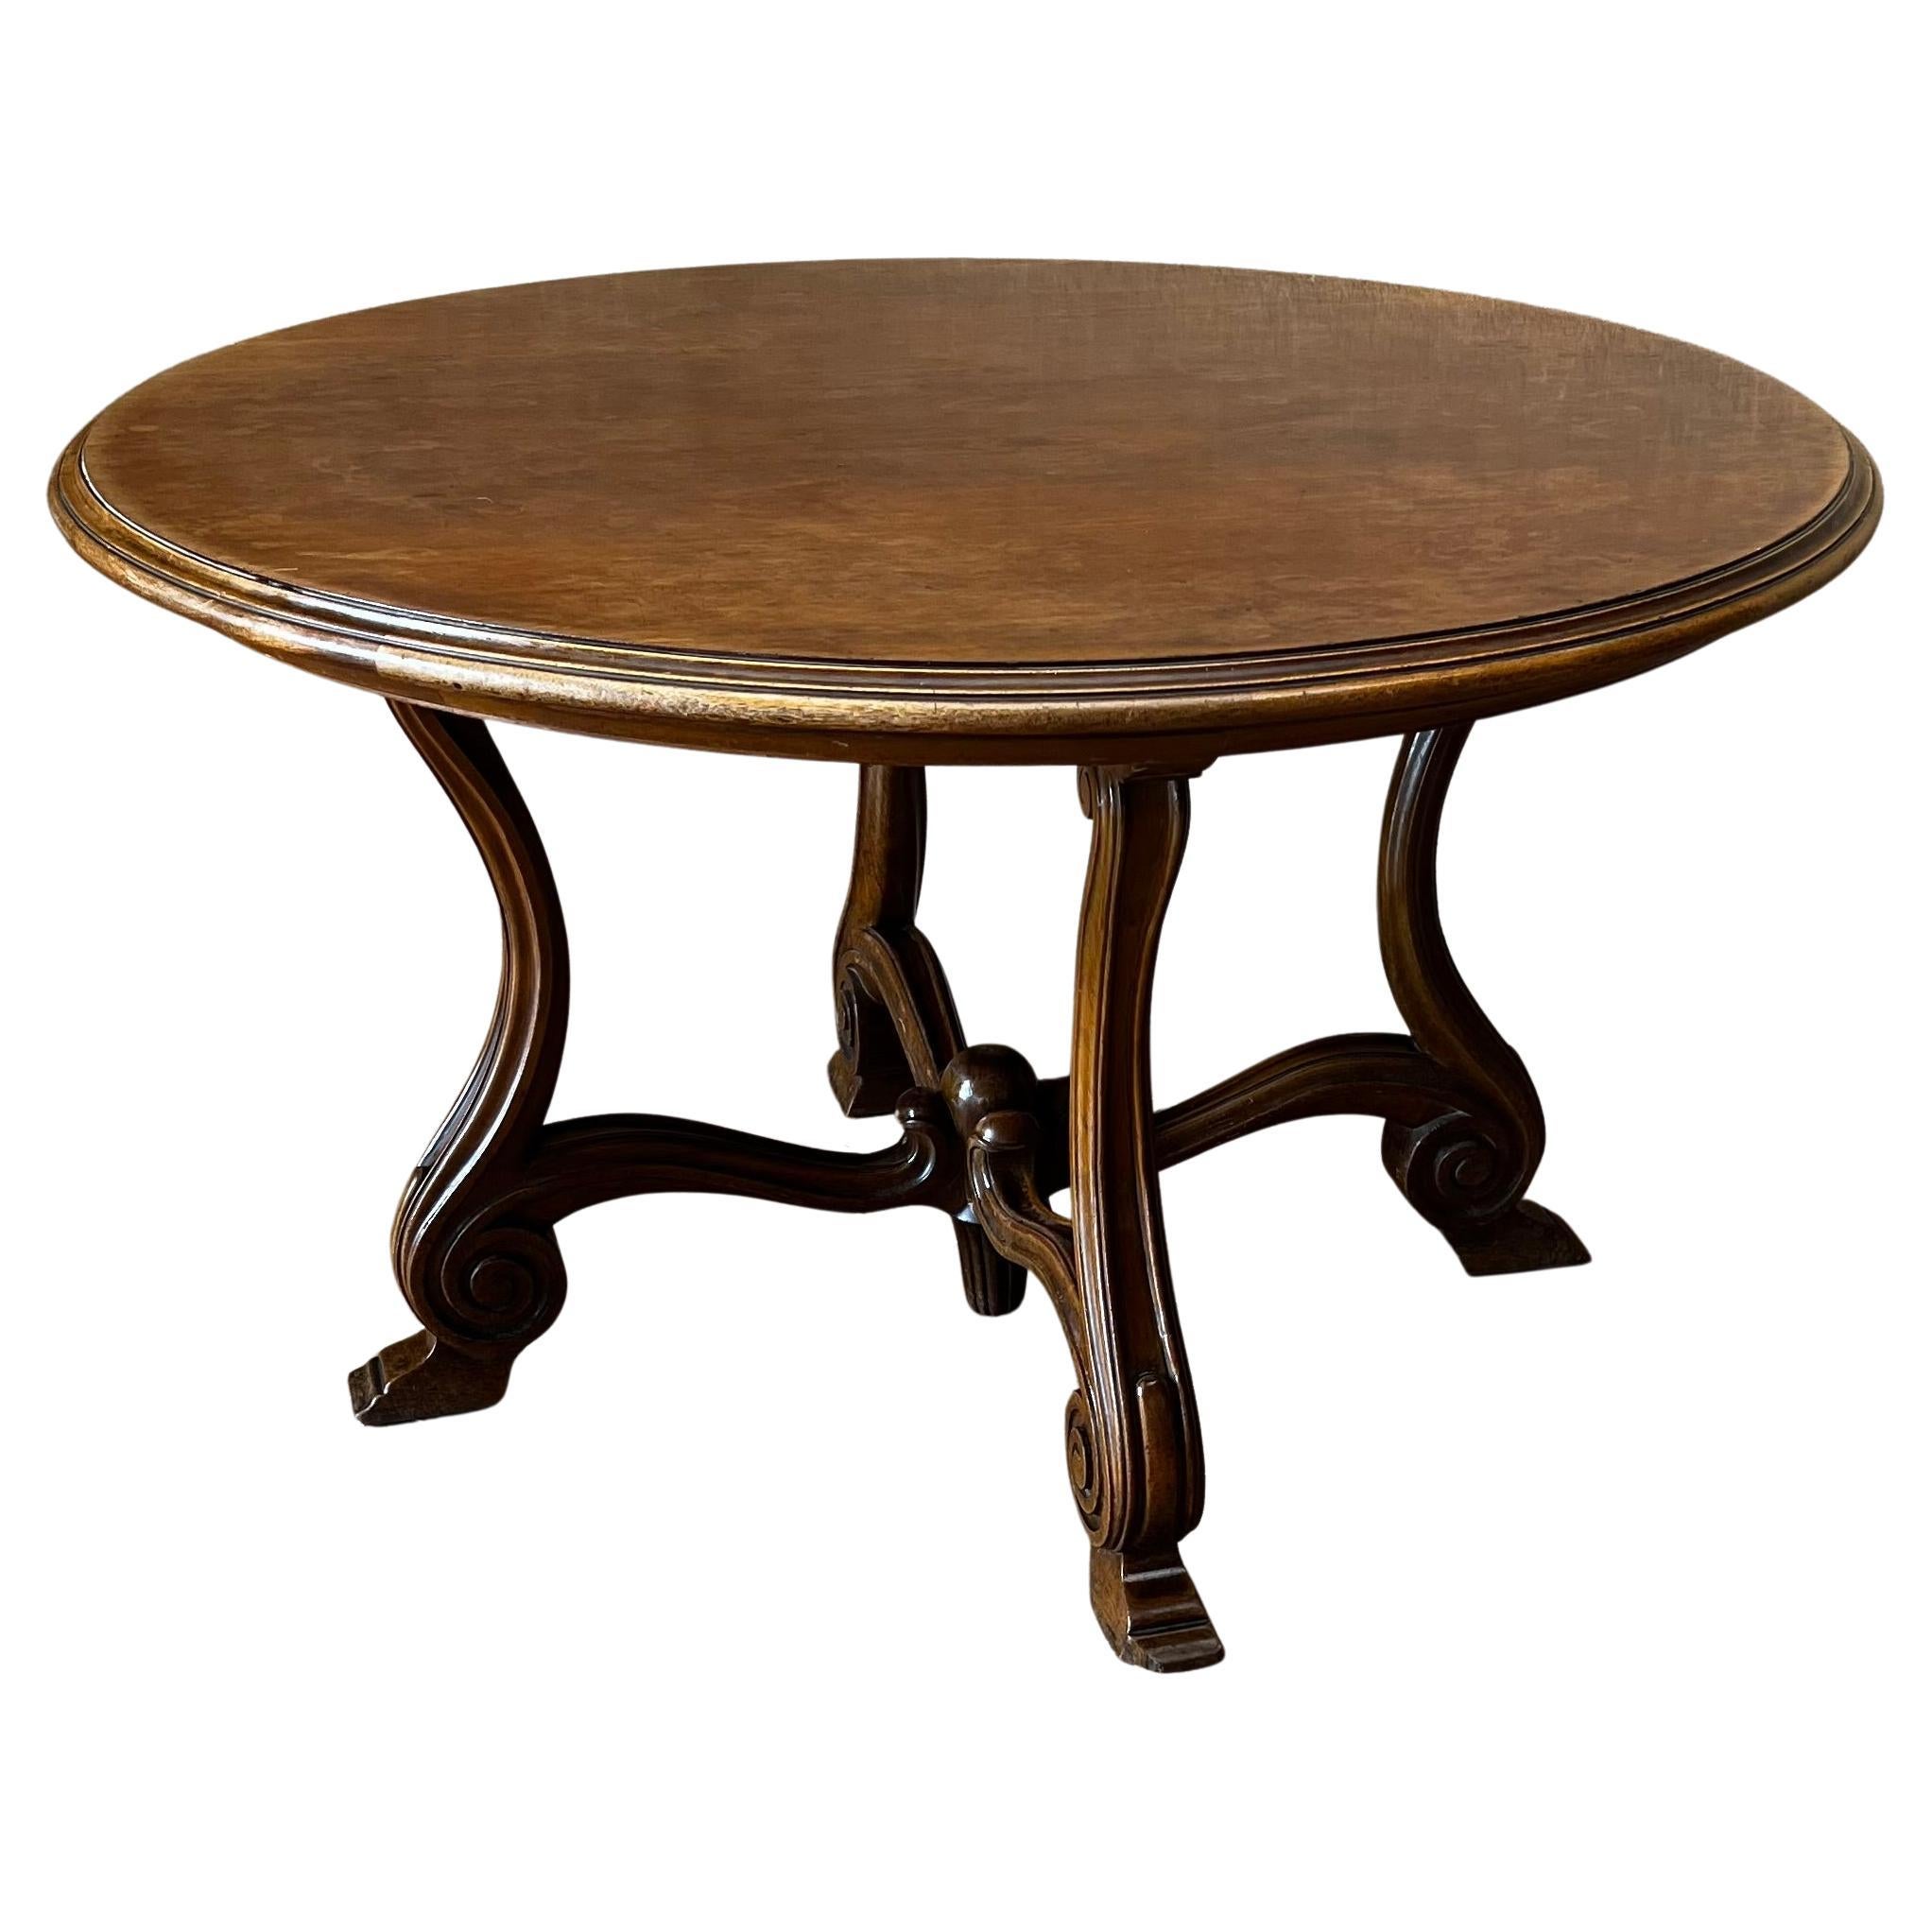 20th Spanish Round Coffee Table with Four Carved Legs and Stretcher